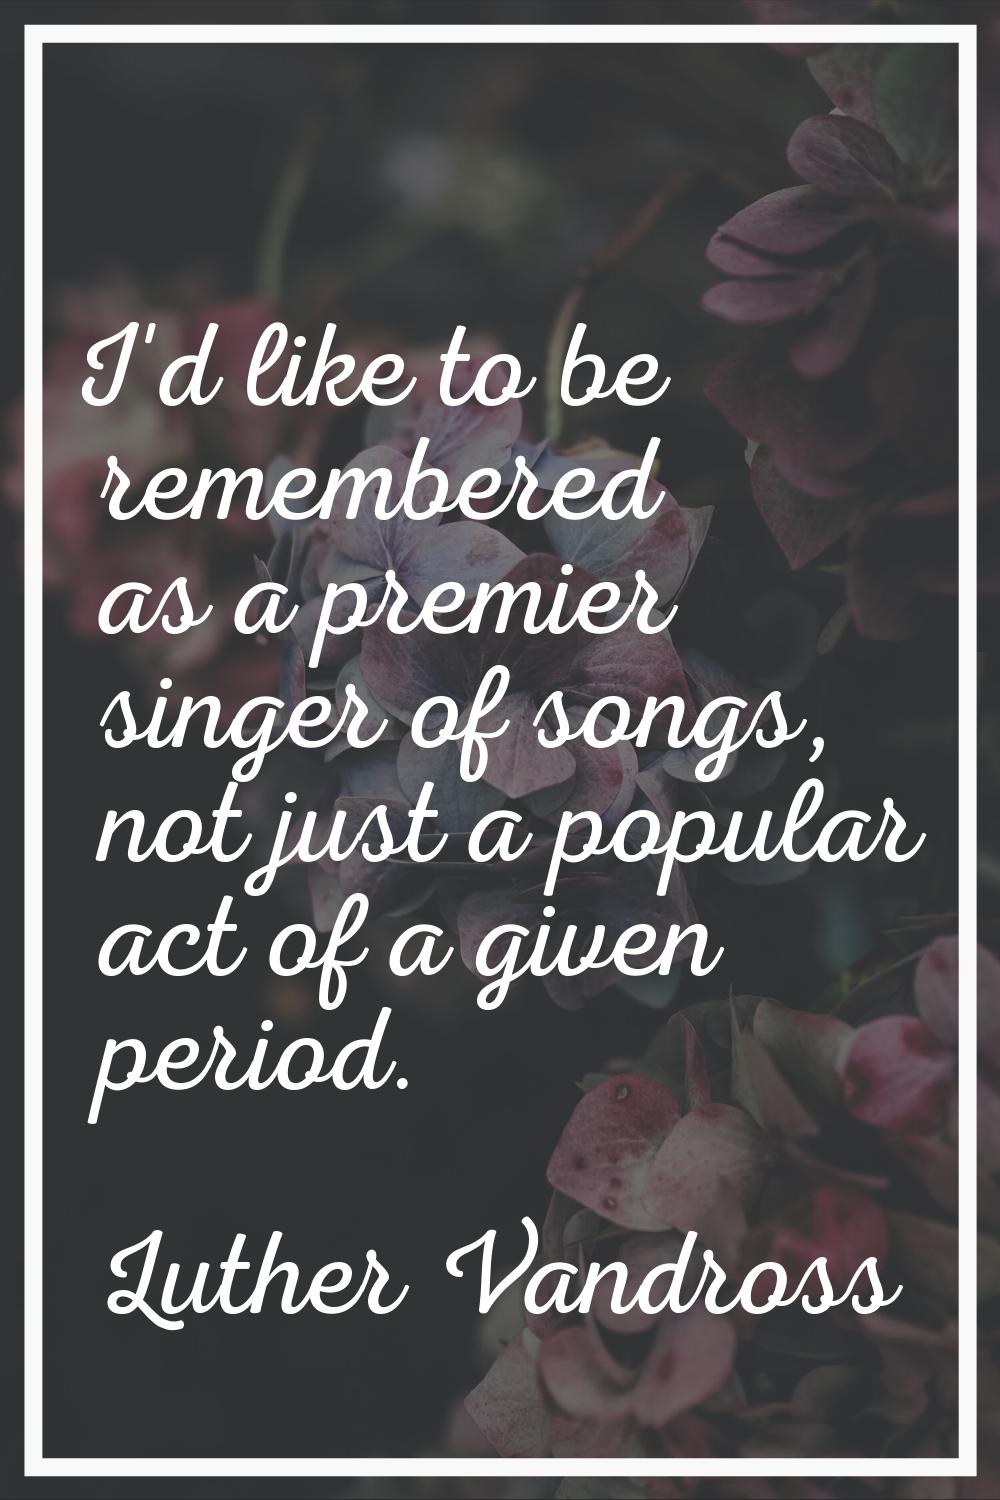 I'd like to be remembered as a premier singer of songs, not just a popular act of a given period.